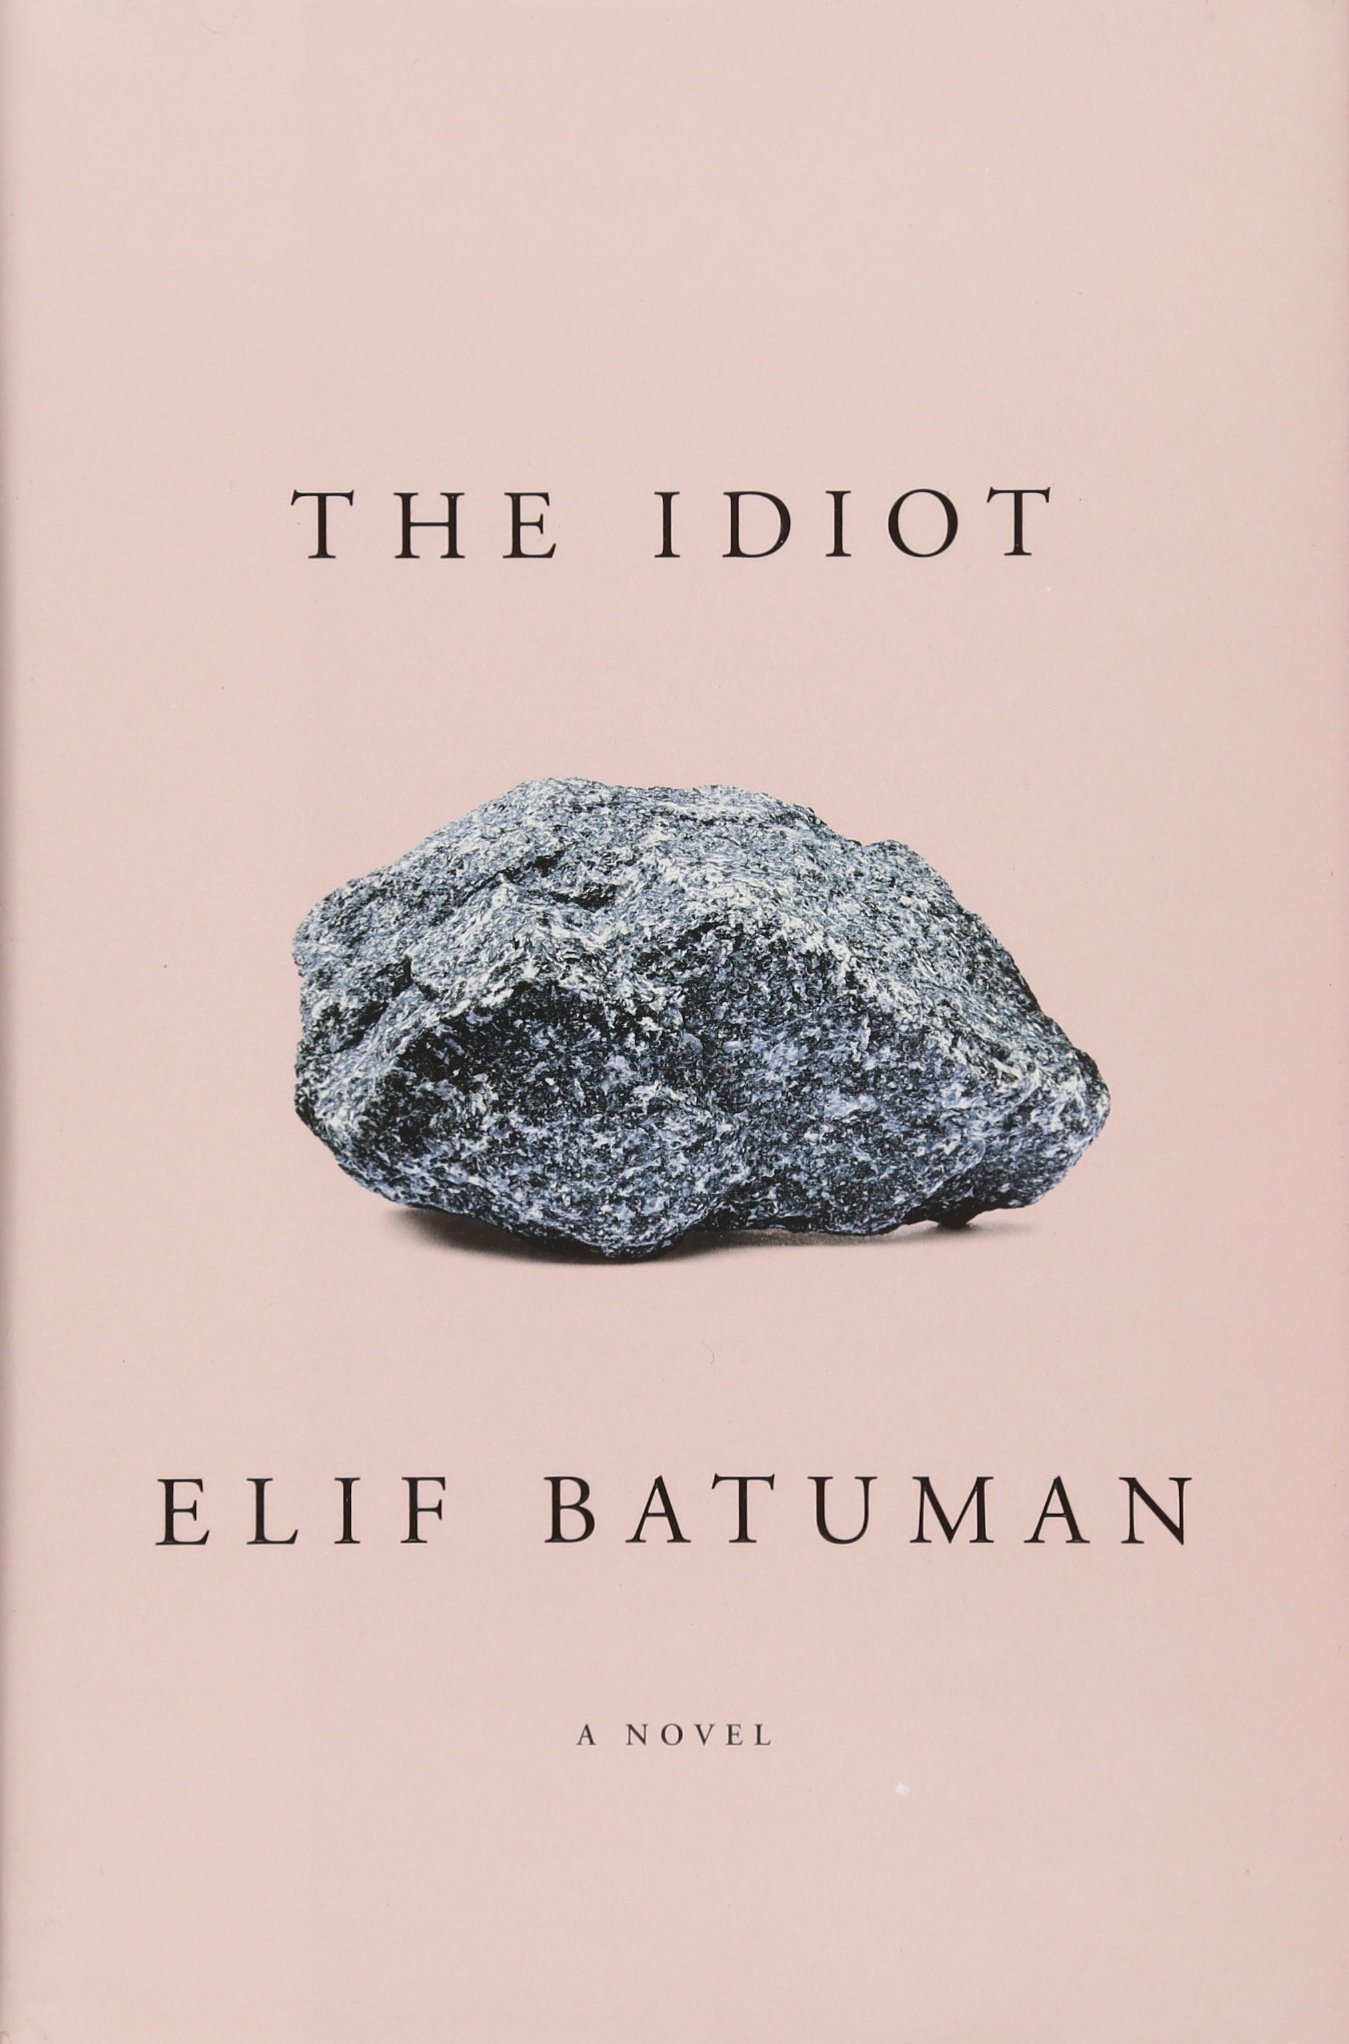 Image result for book the idiot